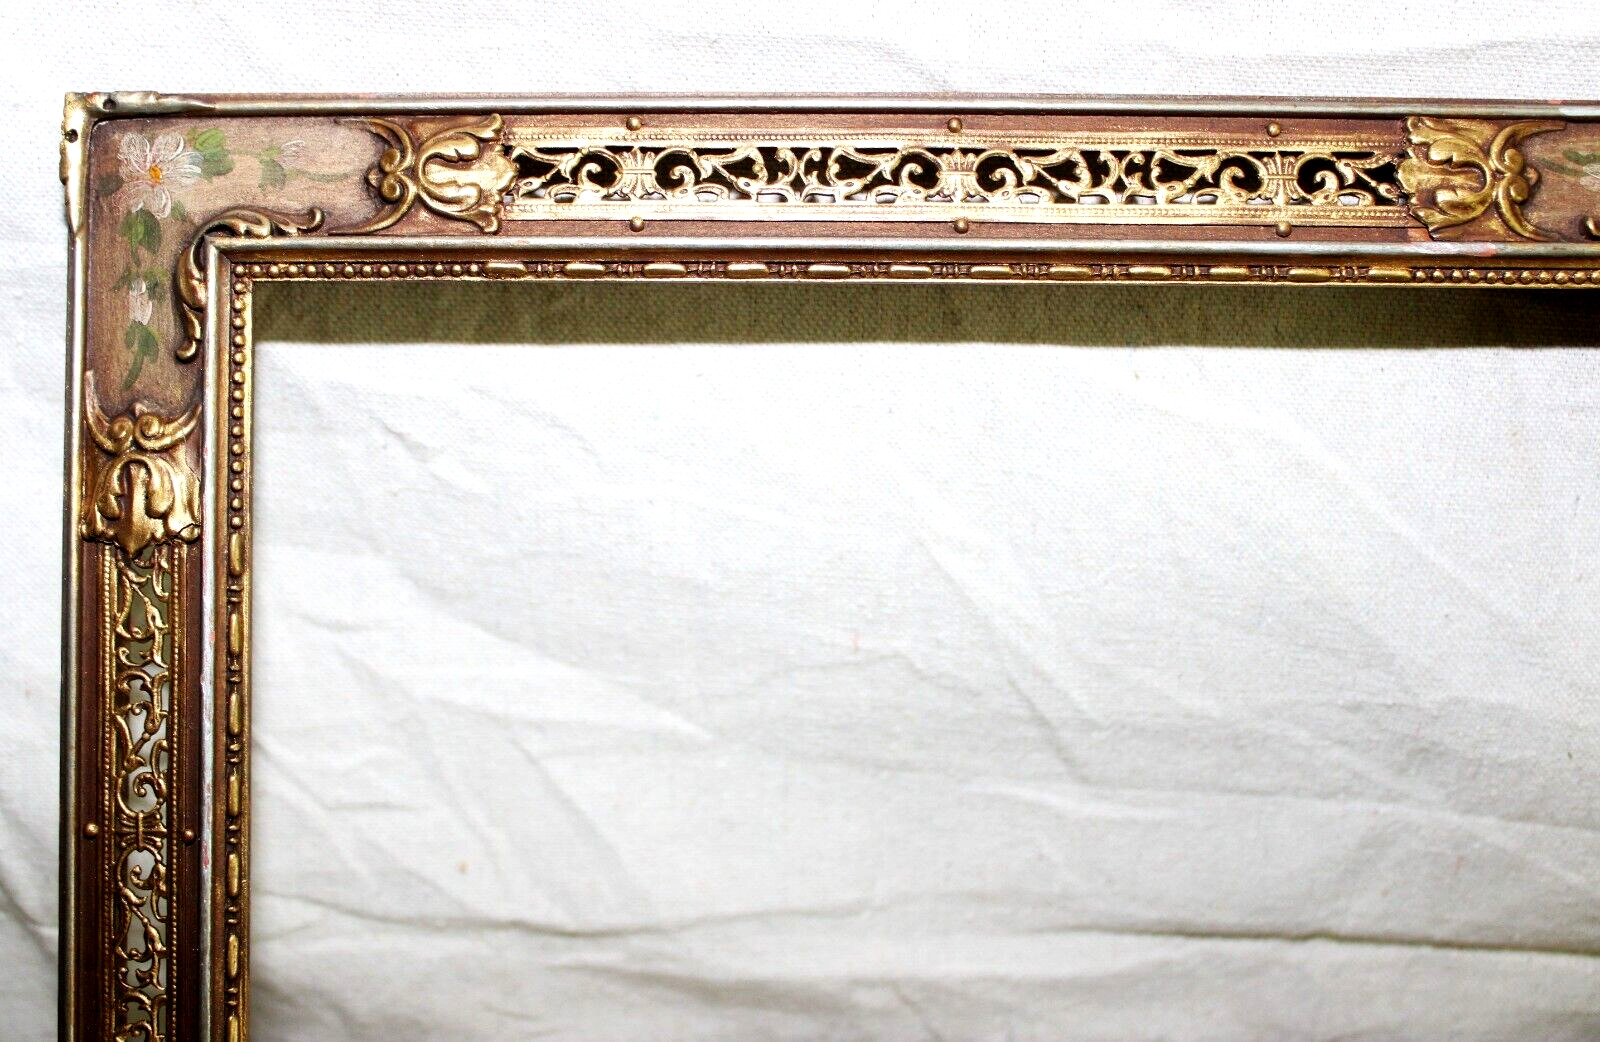 RARE ANTIQUE FITS 7 X 9 PICTURE FRAME WOOD BRASS RETICULATED HAND PAINTED FLORAL